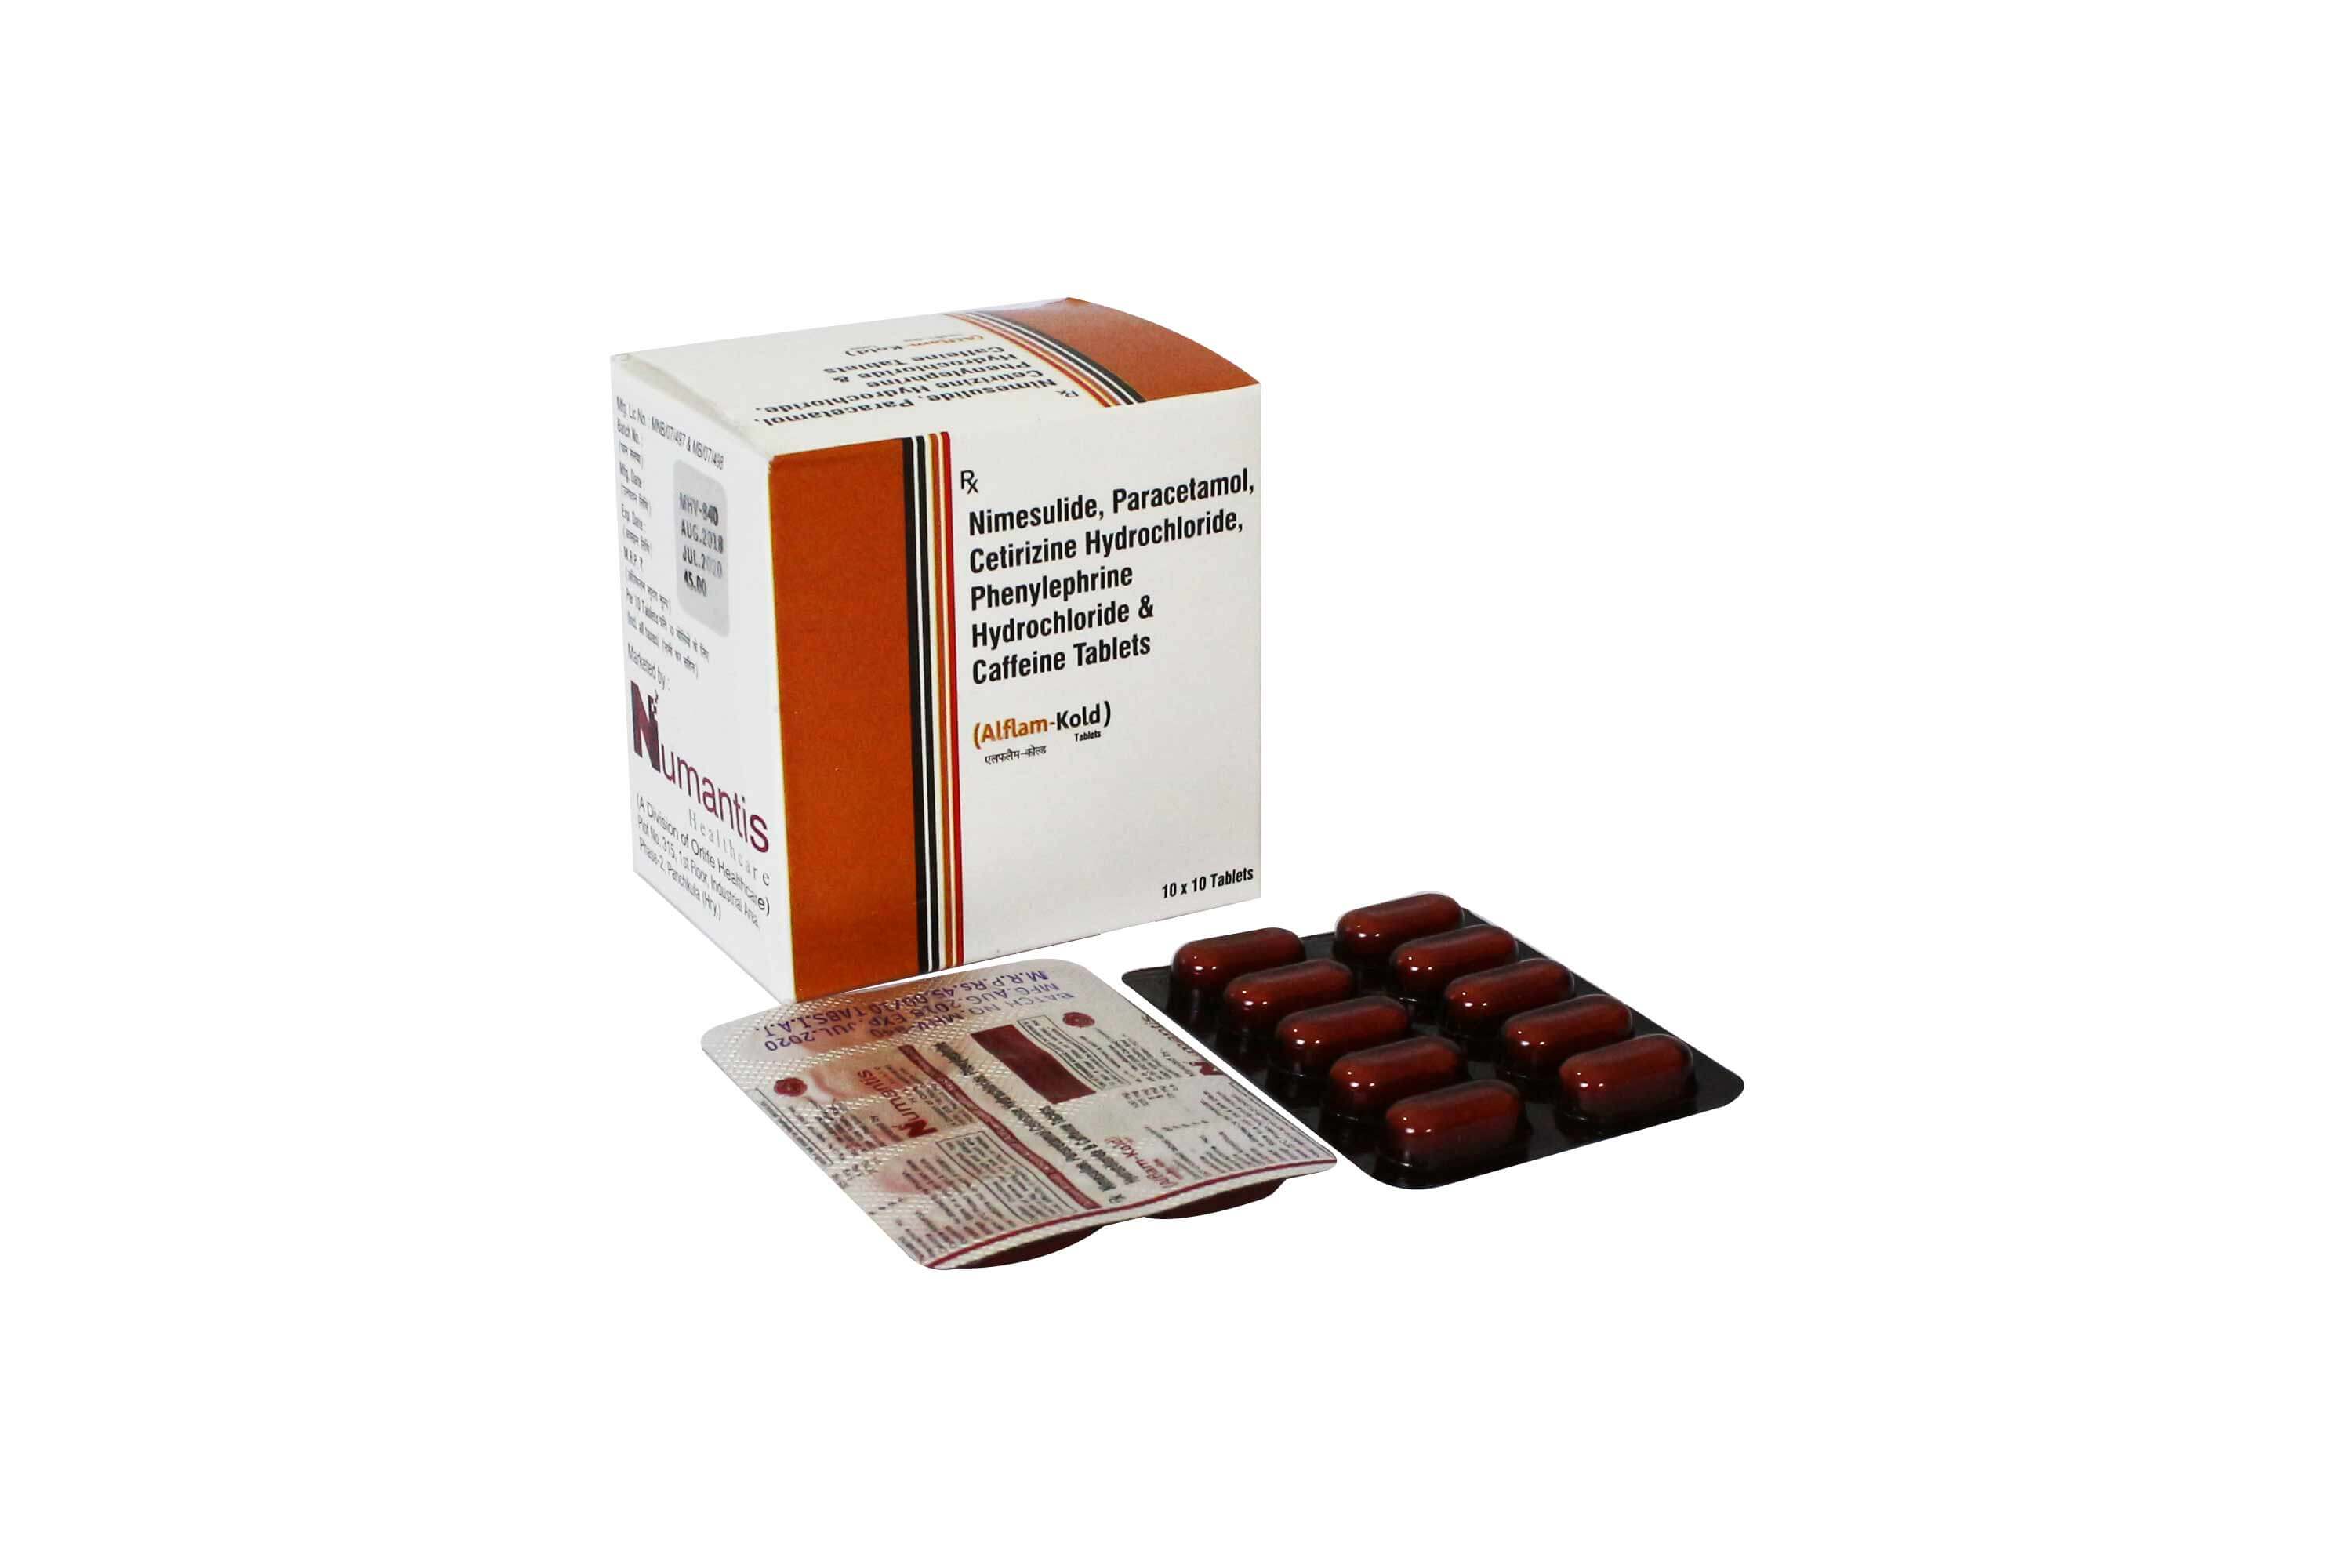 Product Name: Alflam Kold, Compositions of Alflam Kold are Nimesulide, Paracetamol, Cetrizine Hydrochloride ,  Phenylphrine Hydrochloride and Caffeine Tablets - Numantis Healthcare